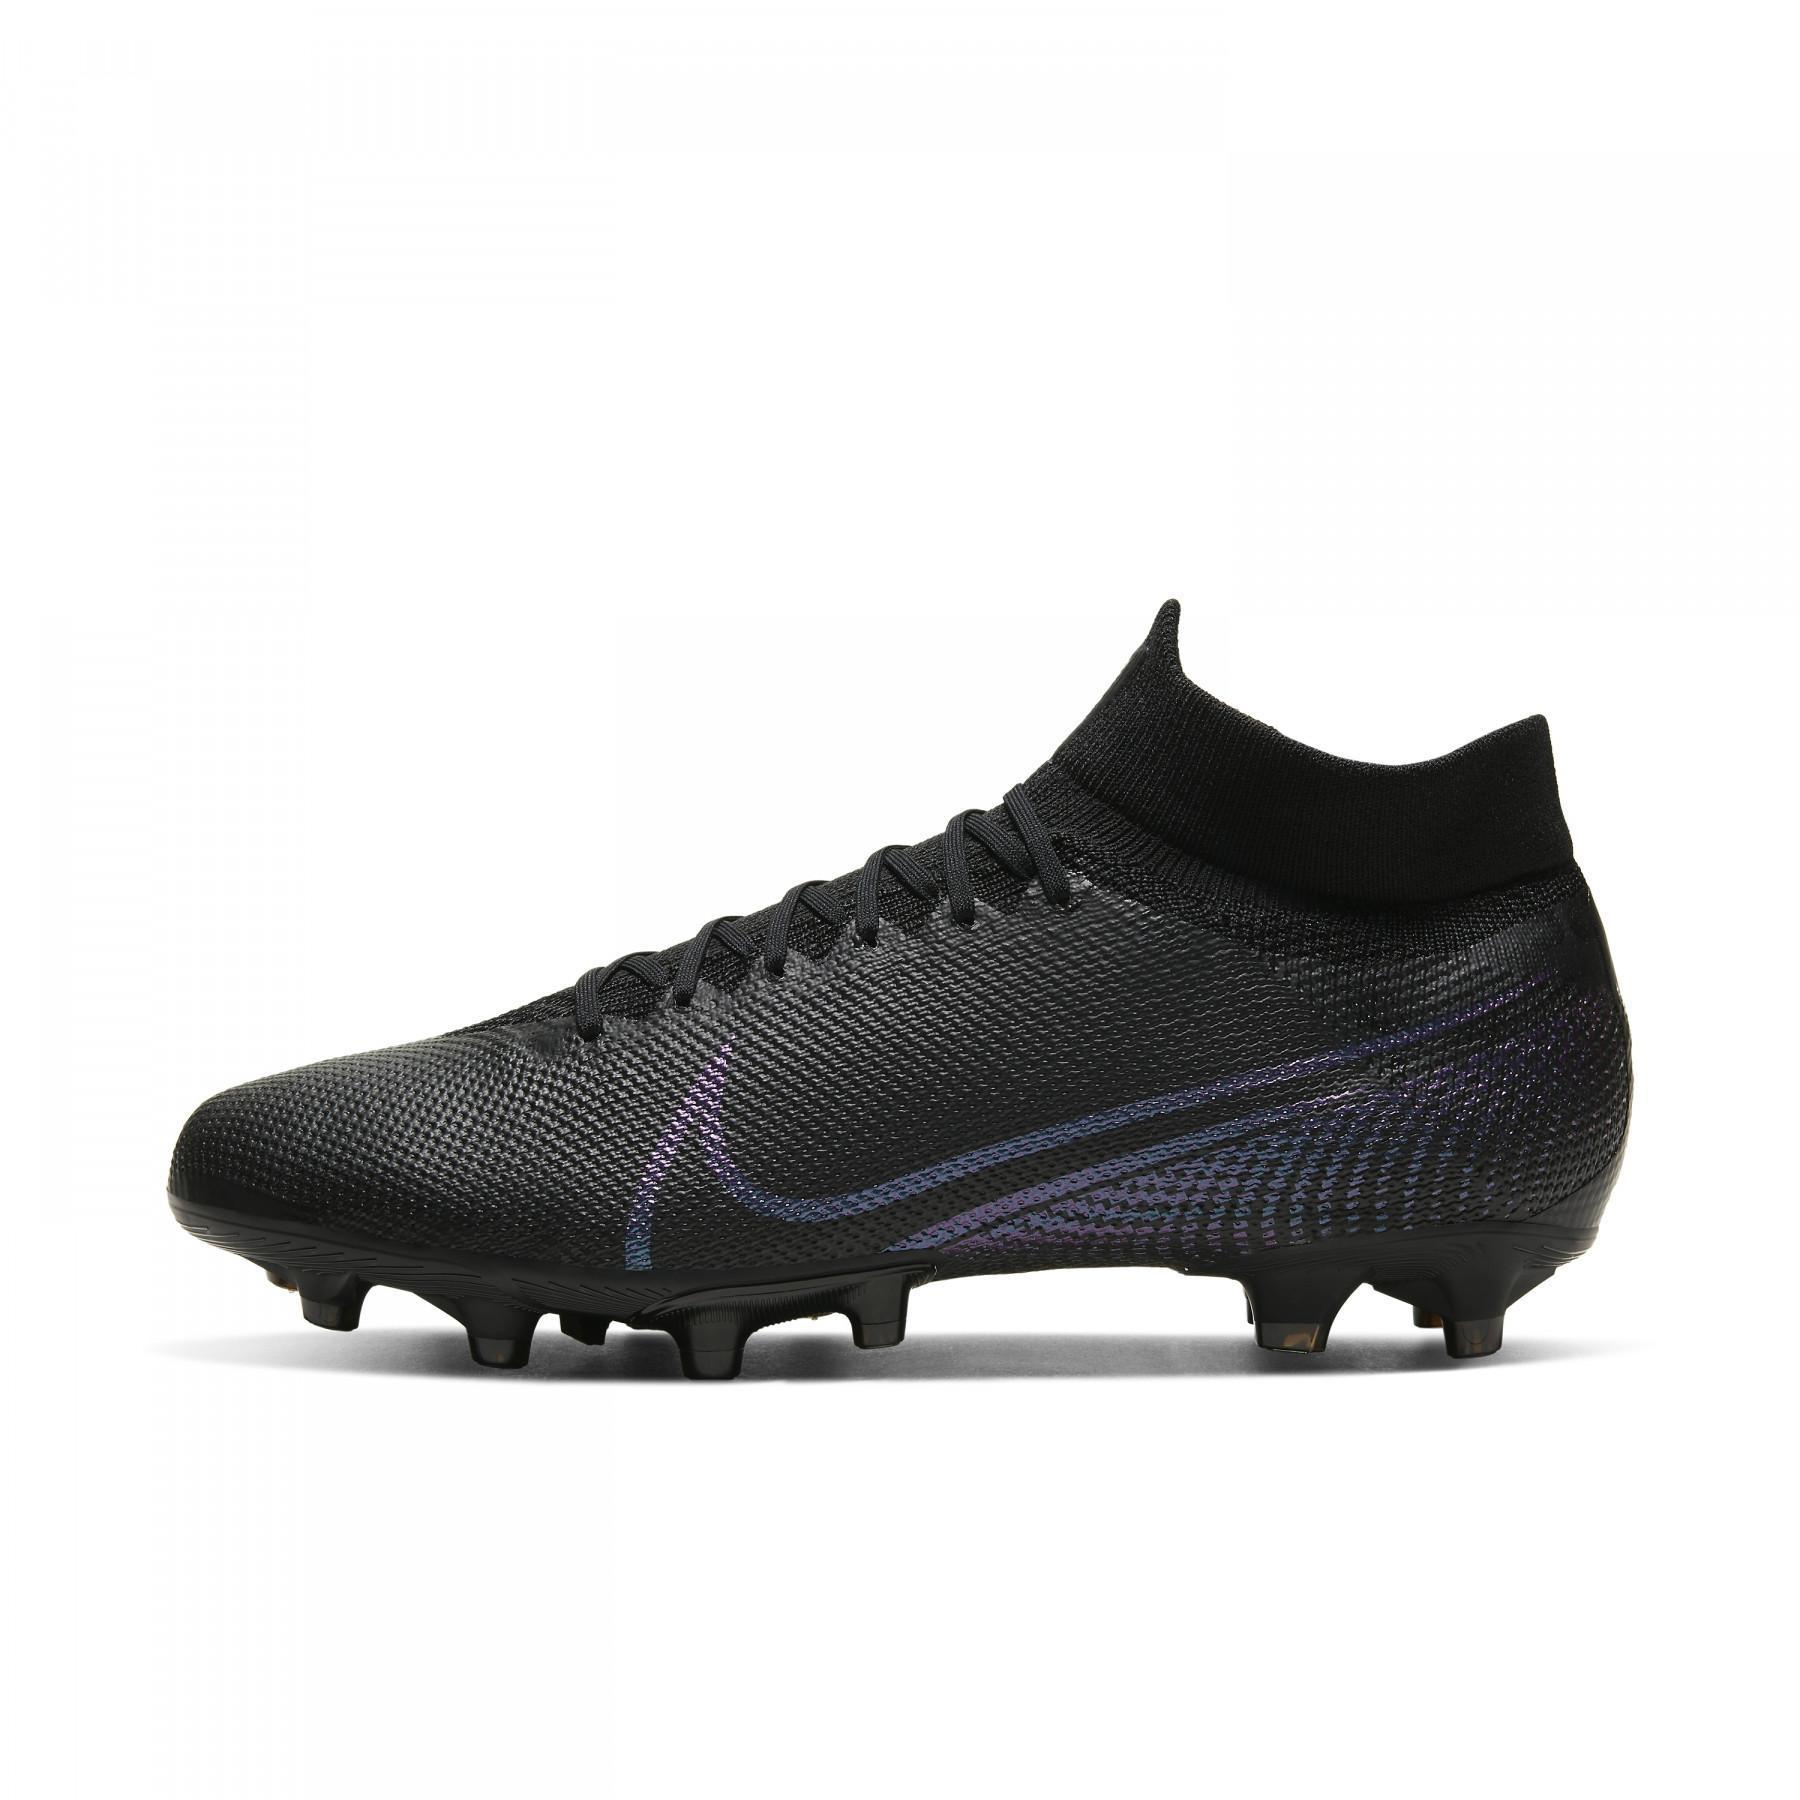 lanthanum extremely wrist Shoes Nike Mercurial Superfly 7 Pro AG